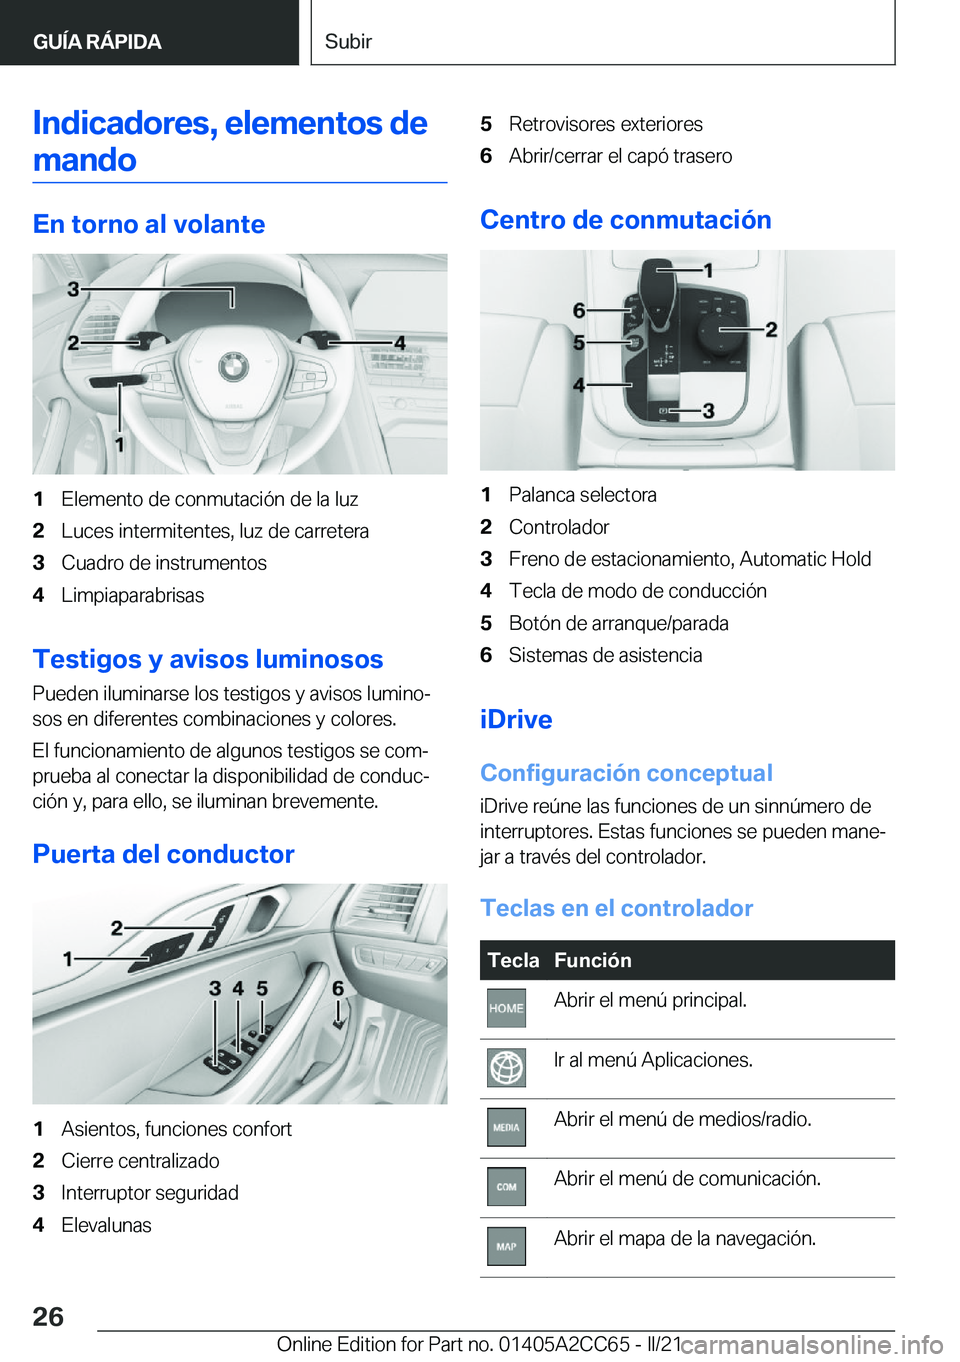 BMW 8 SERIES GRAN COUPE 2022  Manuales de Empleo (in Spanish) �I�n�d�i�c�a�d�o�r�e�s�,��e�l�e�m�e�n�t�o�s��d�e�m�a�n�d�o
�E�n��t�o�r�n�o��a�l��v�o�l�a�n�t�e
�1�E�l�e�m�e�n�t�o��d�e��c�o�n�m�u�t�a�c�i�